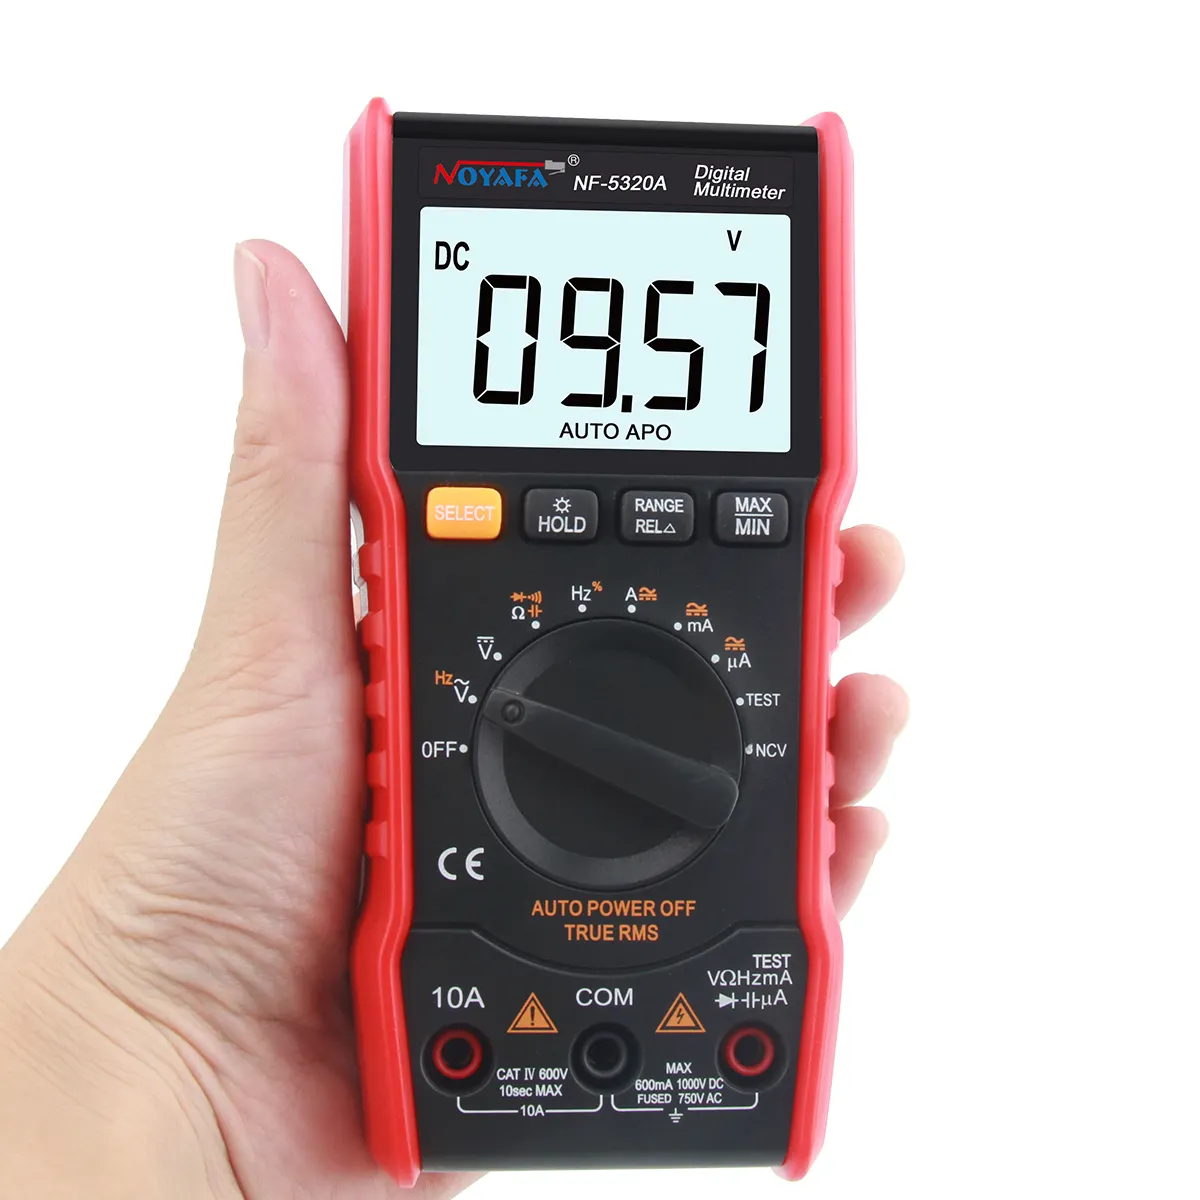 Noyafa NF-5320A multifunction digital multimeter measuring Ohm voltage dc ac diode continuous test.